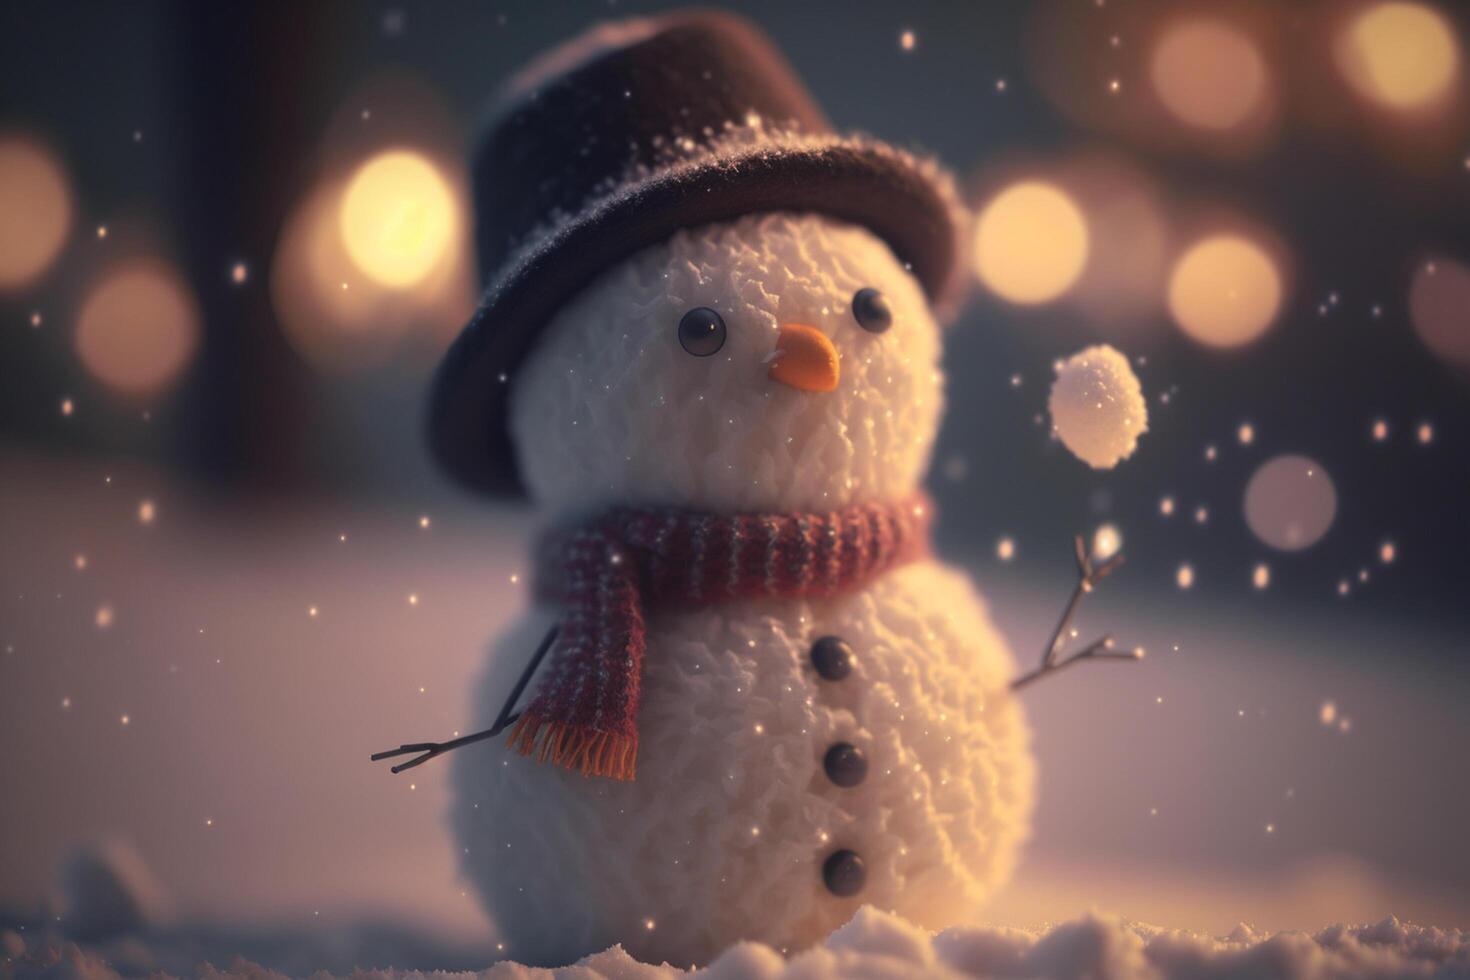 Cozy Winter Evening A Cheerful Little Snowman with Hat and Scarf in a Serene Winter Landscape photo